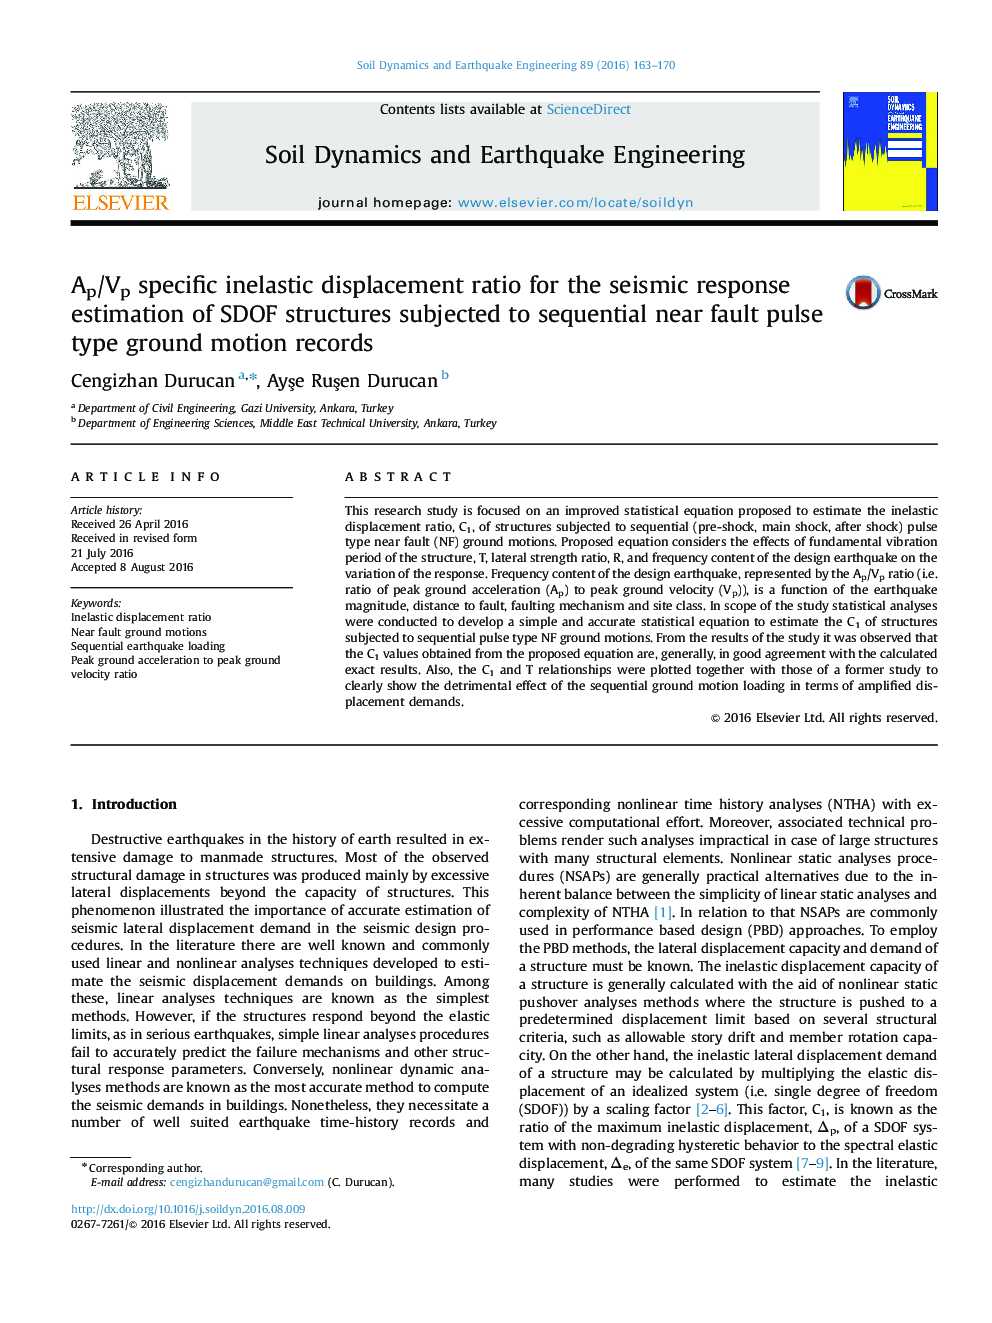 Ap/Vp specific inelastic displacement ratio for the seismic response estimation of SDOF structures subjected to sequential near fault pulse type ground motion records